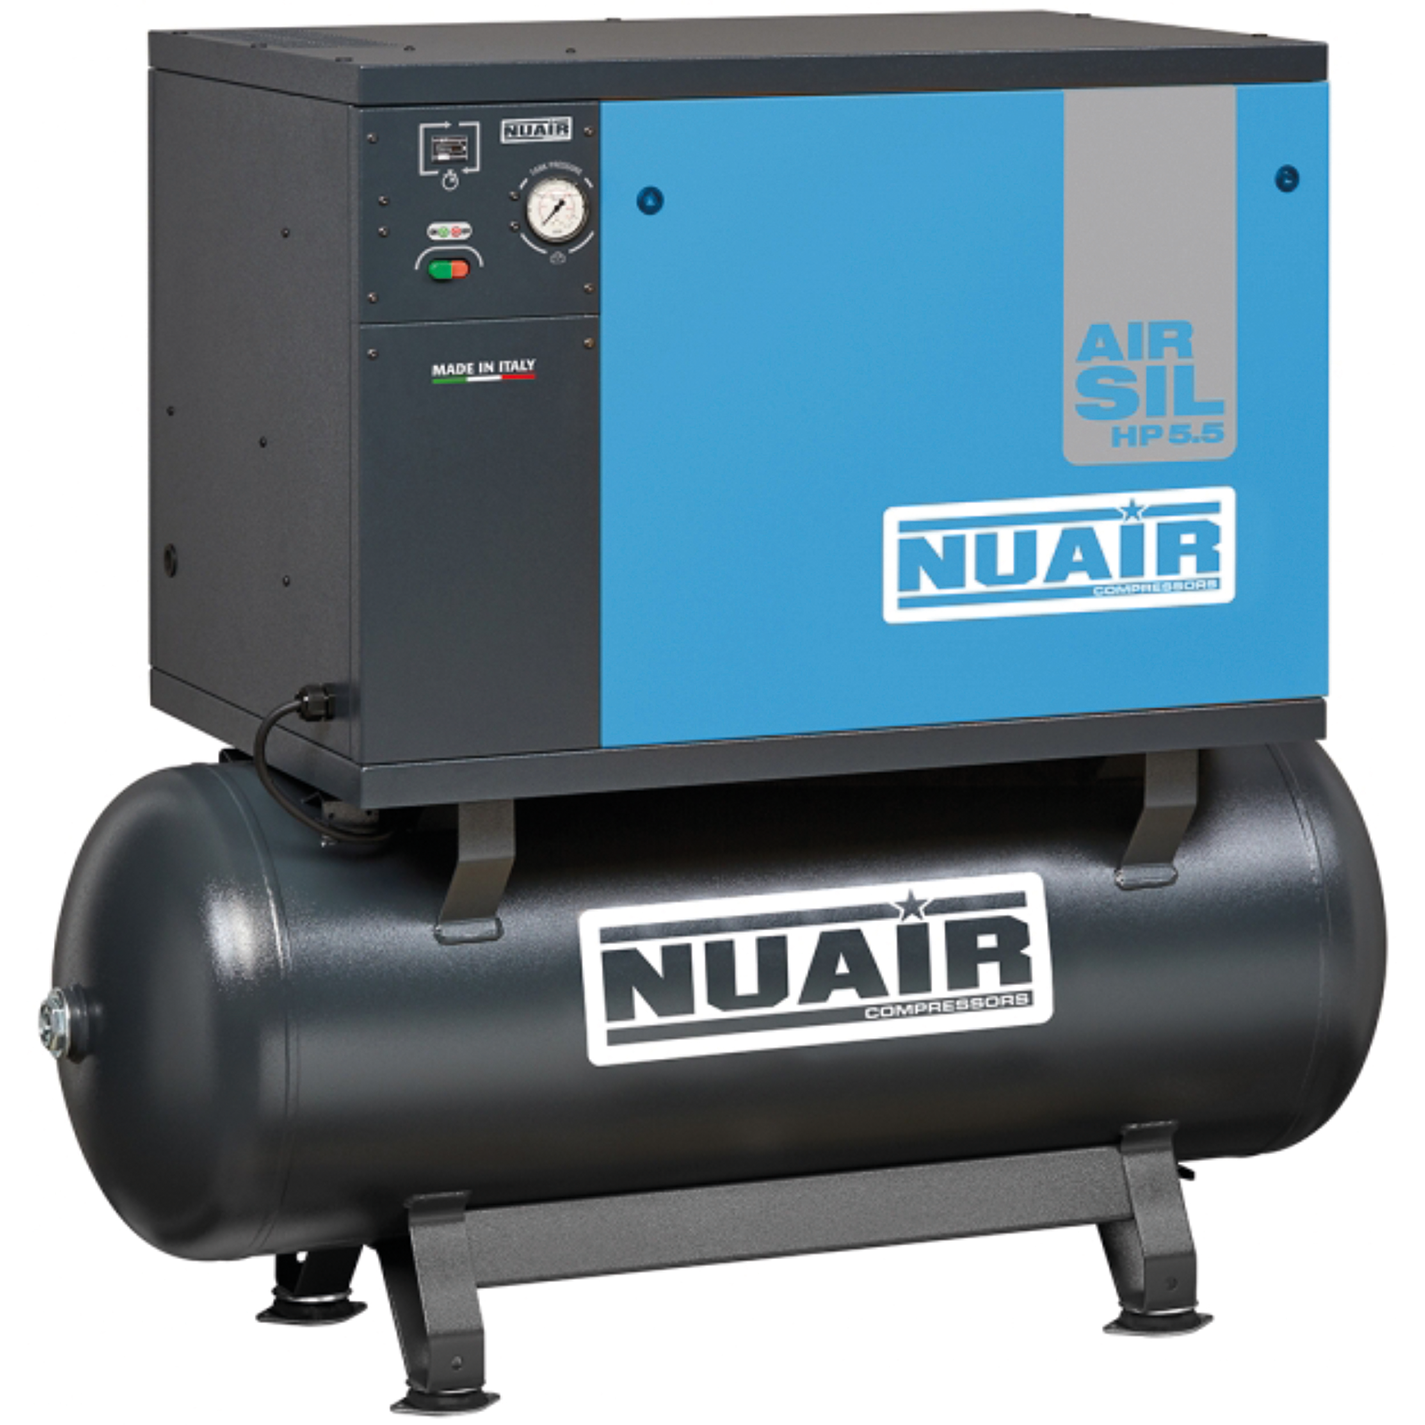 Suppliers of High Quality Piston Compressors UK